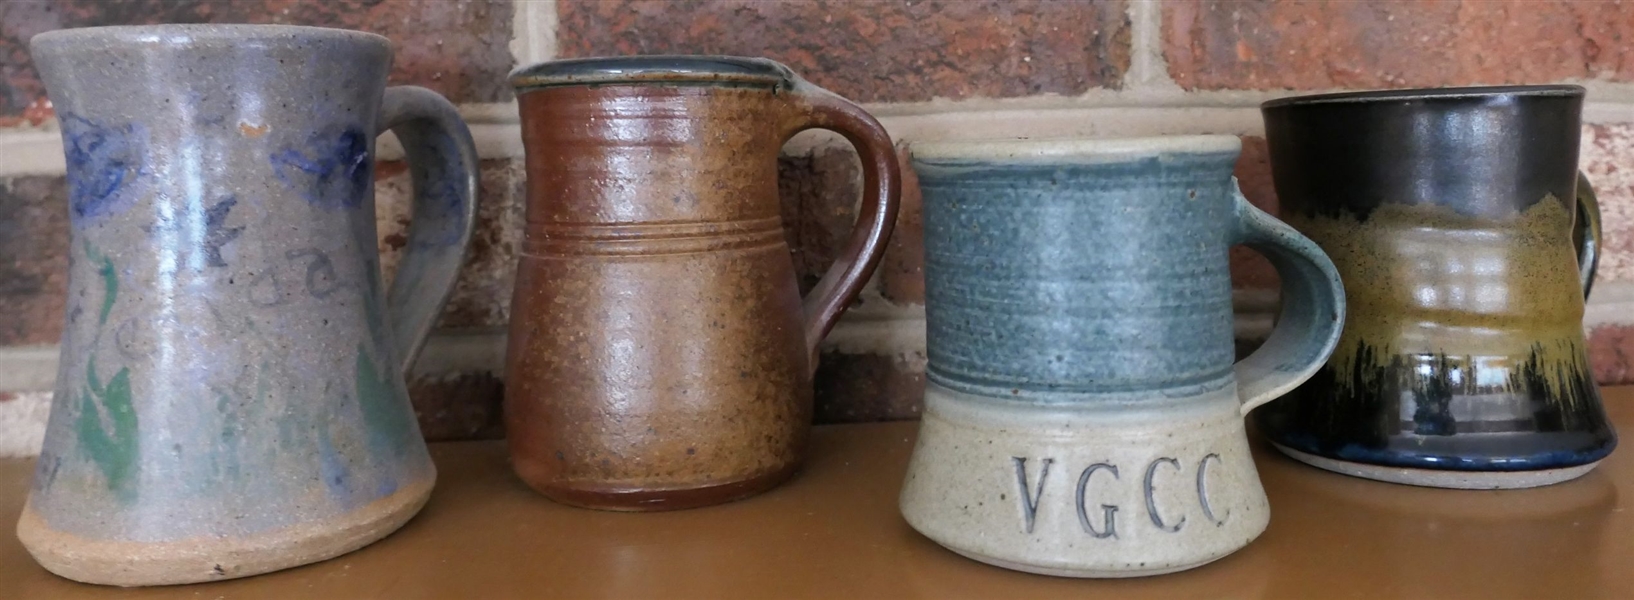 4 Art Pottery Mugs - 1 VGCC, 1 Tucker, and Other Signed Drena 1987